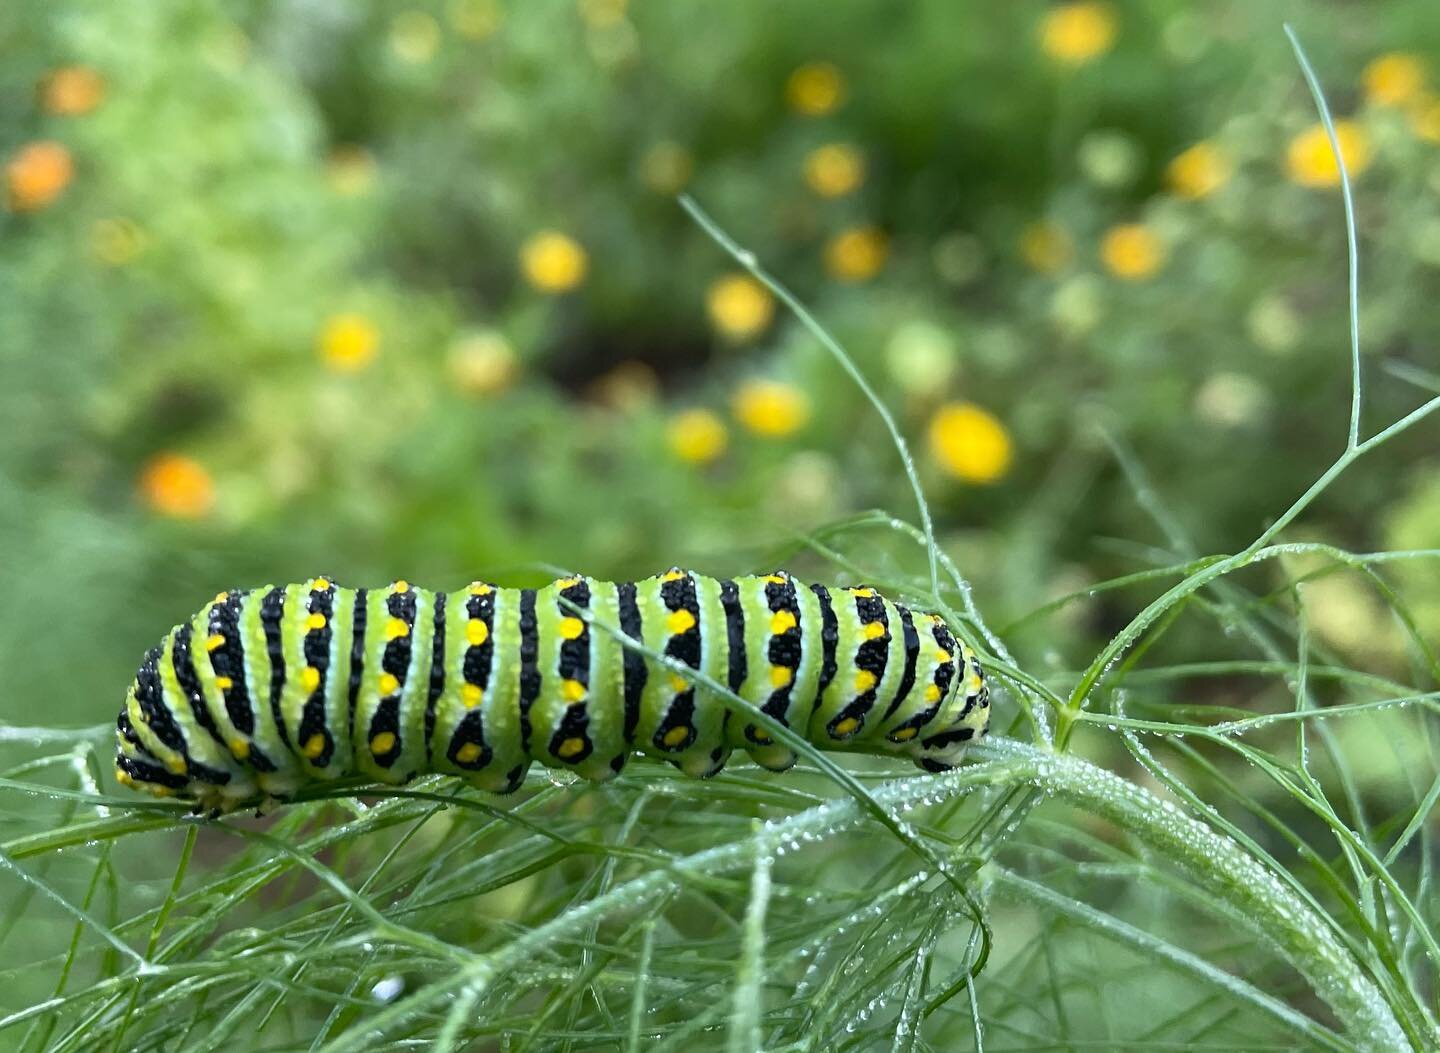 Swallowtail caterpillars, a rove beetle eating a winter cut worm, and a Northwestern salamander hanging out in a crimped bed of oat/pea mulch are the icing on the cake of what has been a phenomenal farm season. 

These are beautiful reminders of just